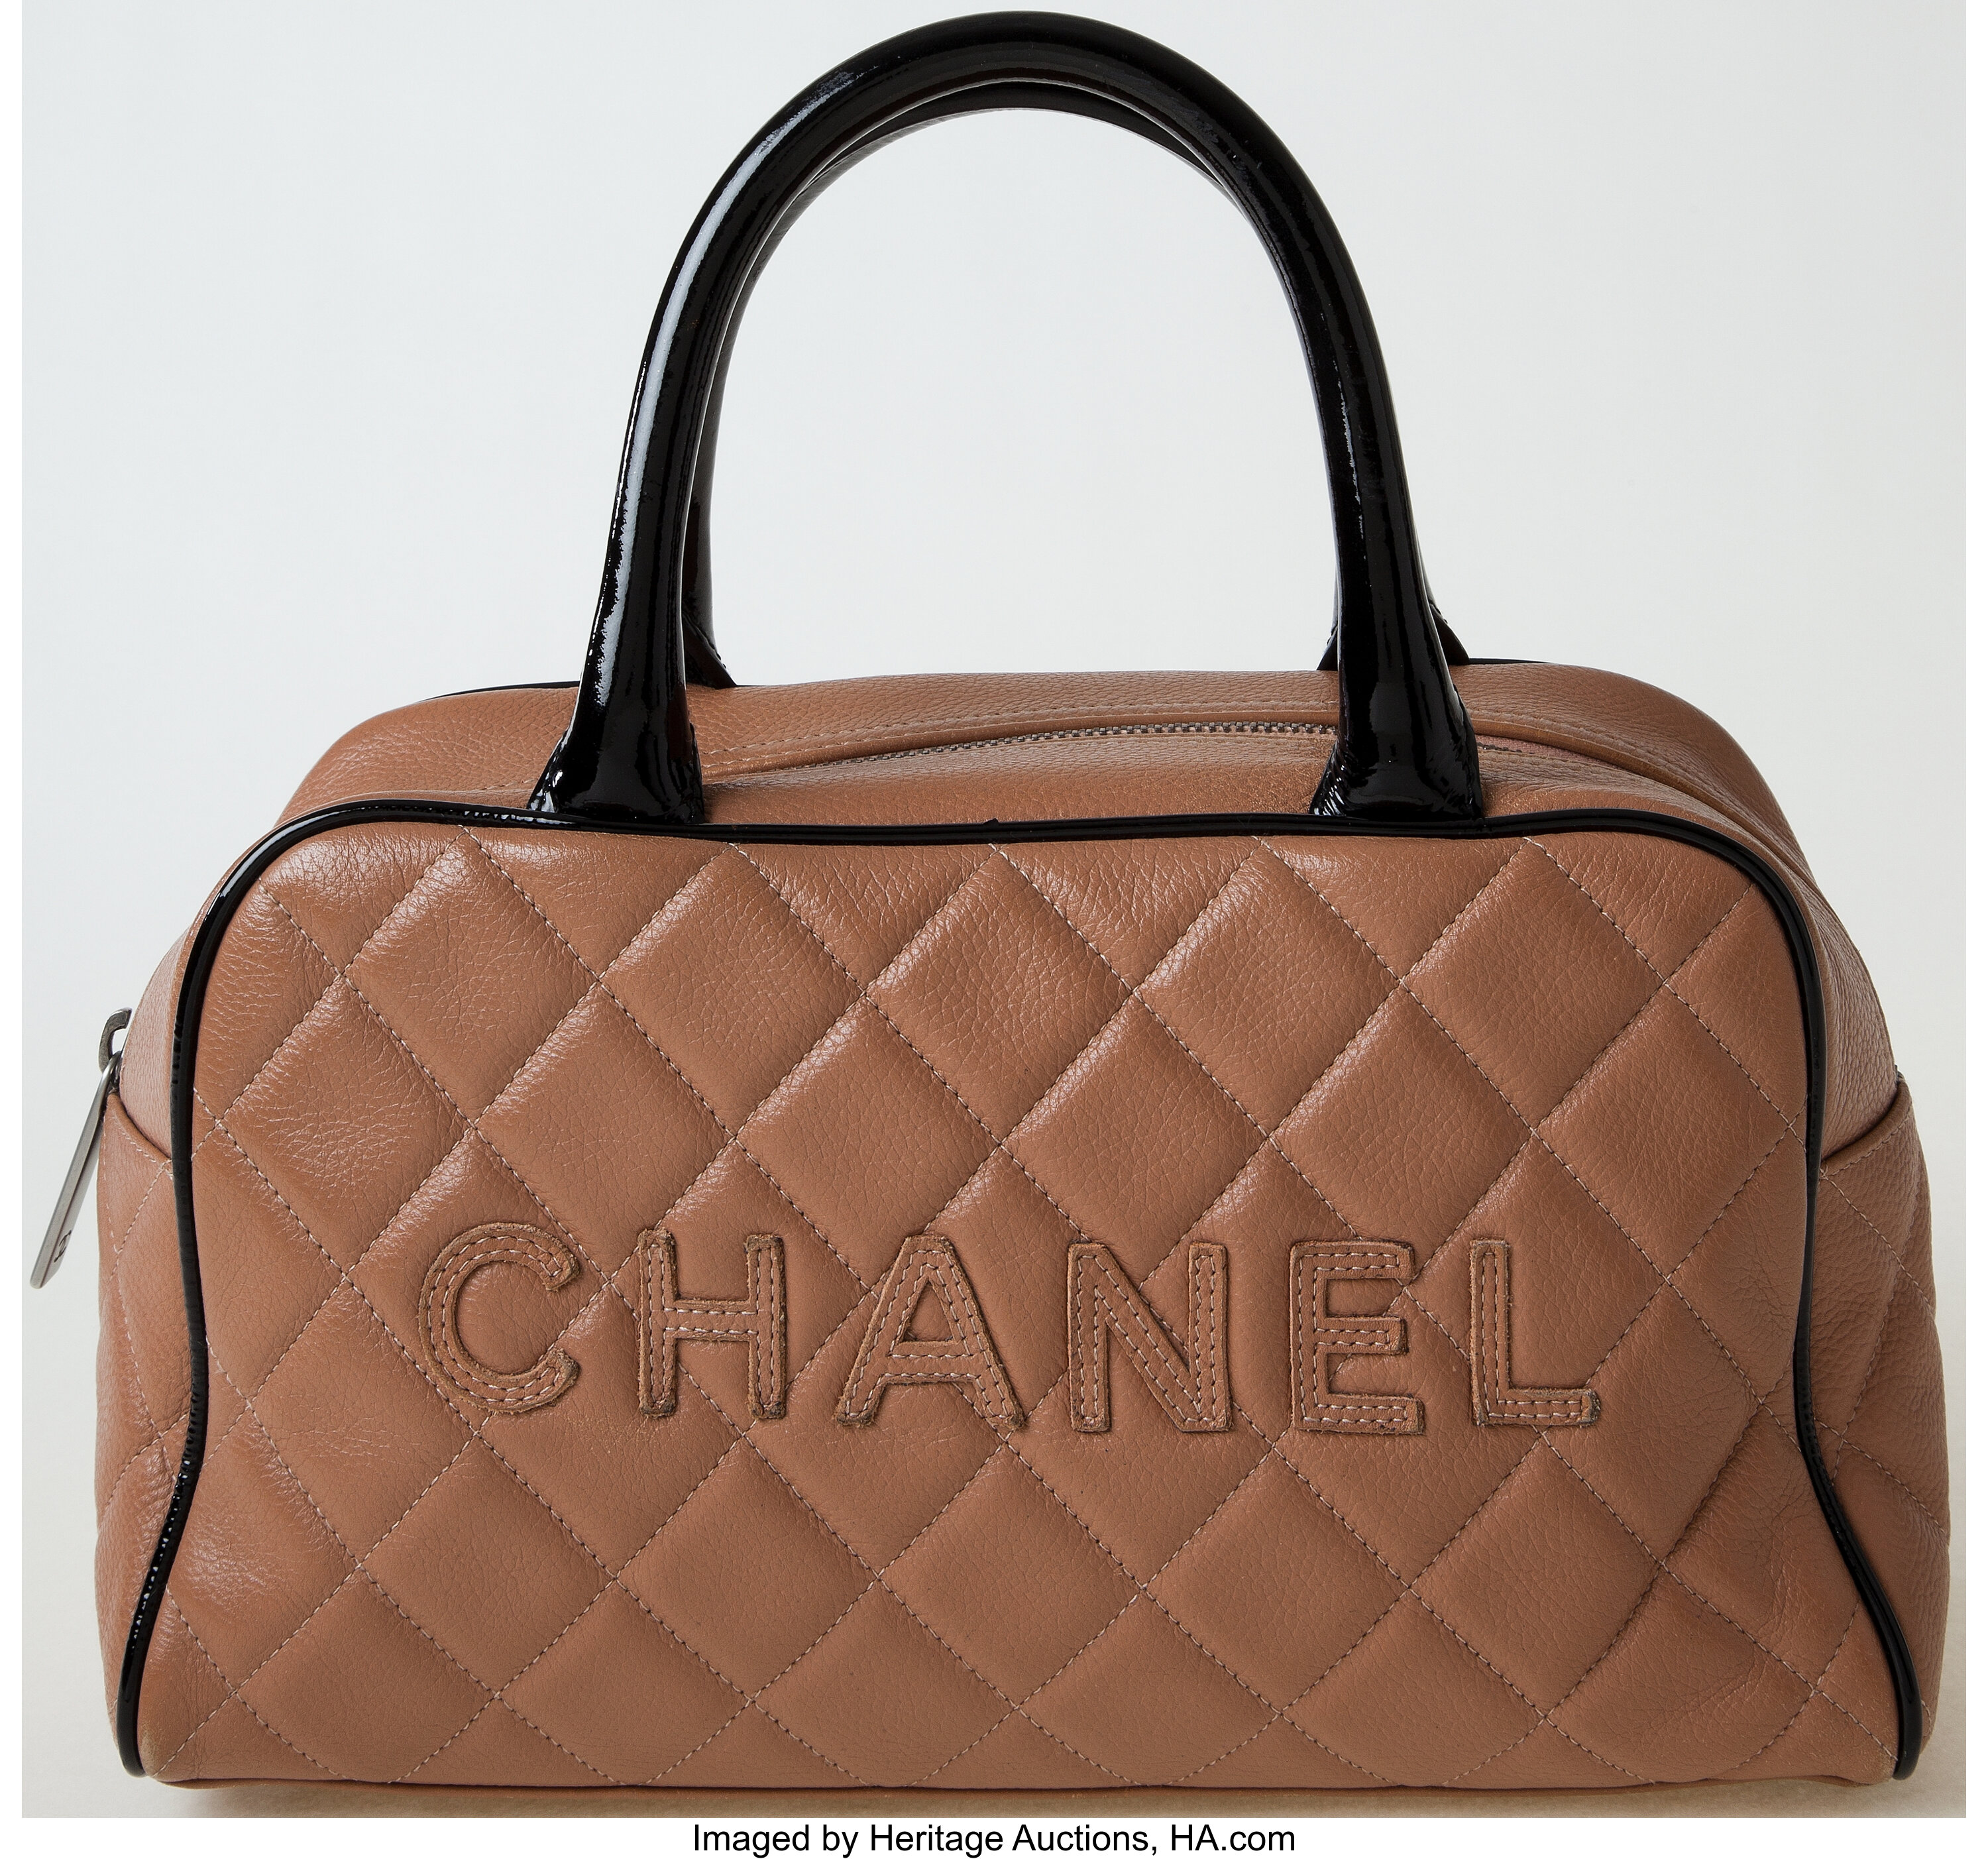 CHANEL Pre-Owned 2003 CC diamond-quilted Bowling Bag - Farfetch